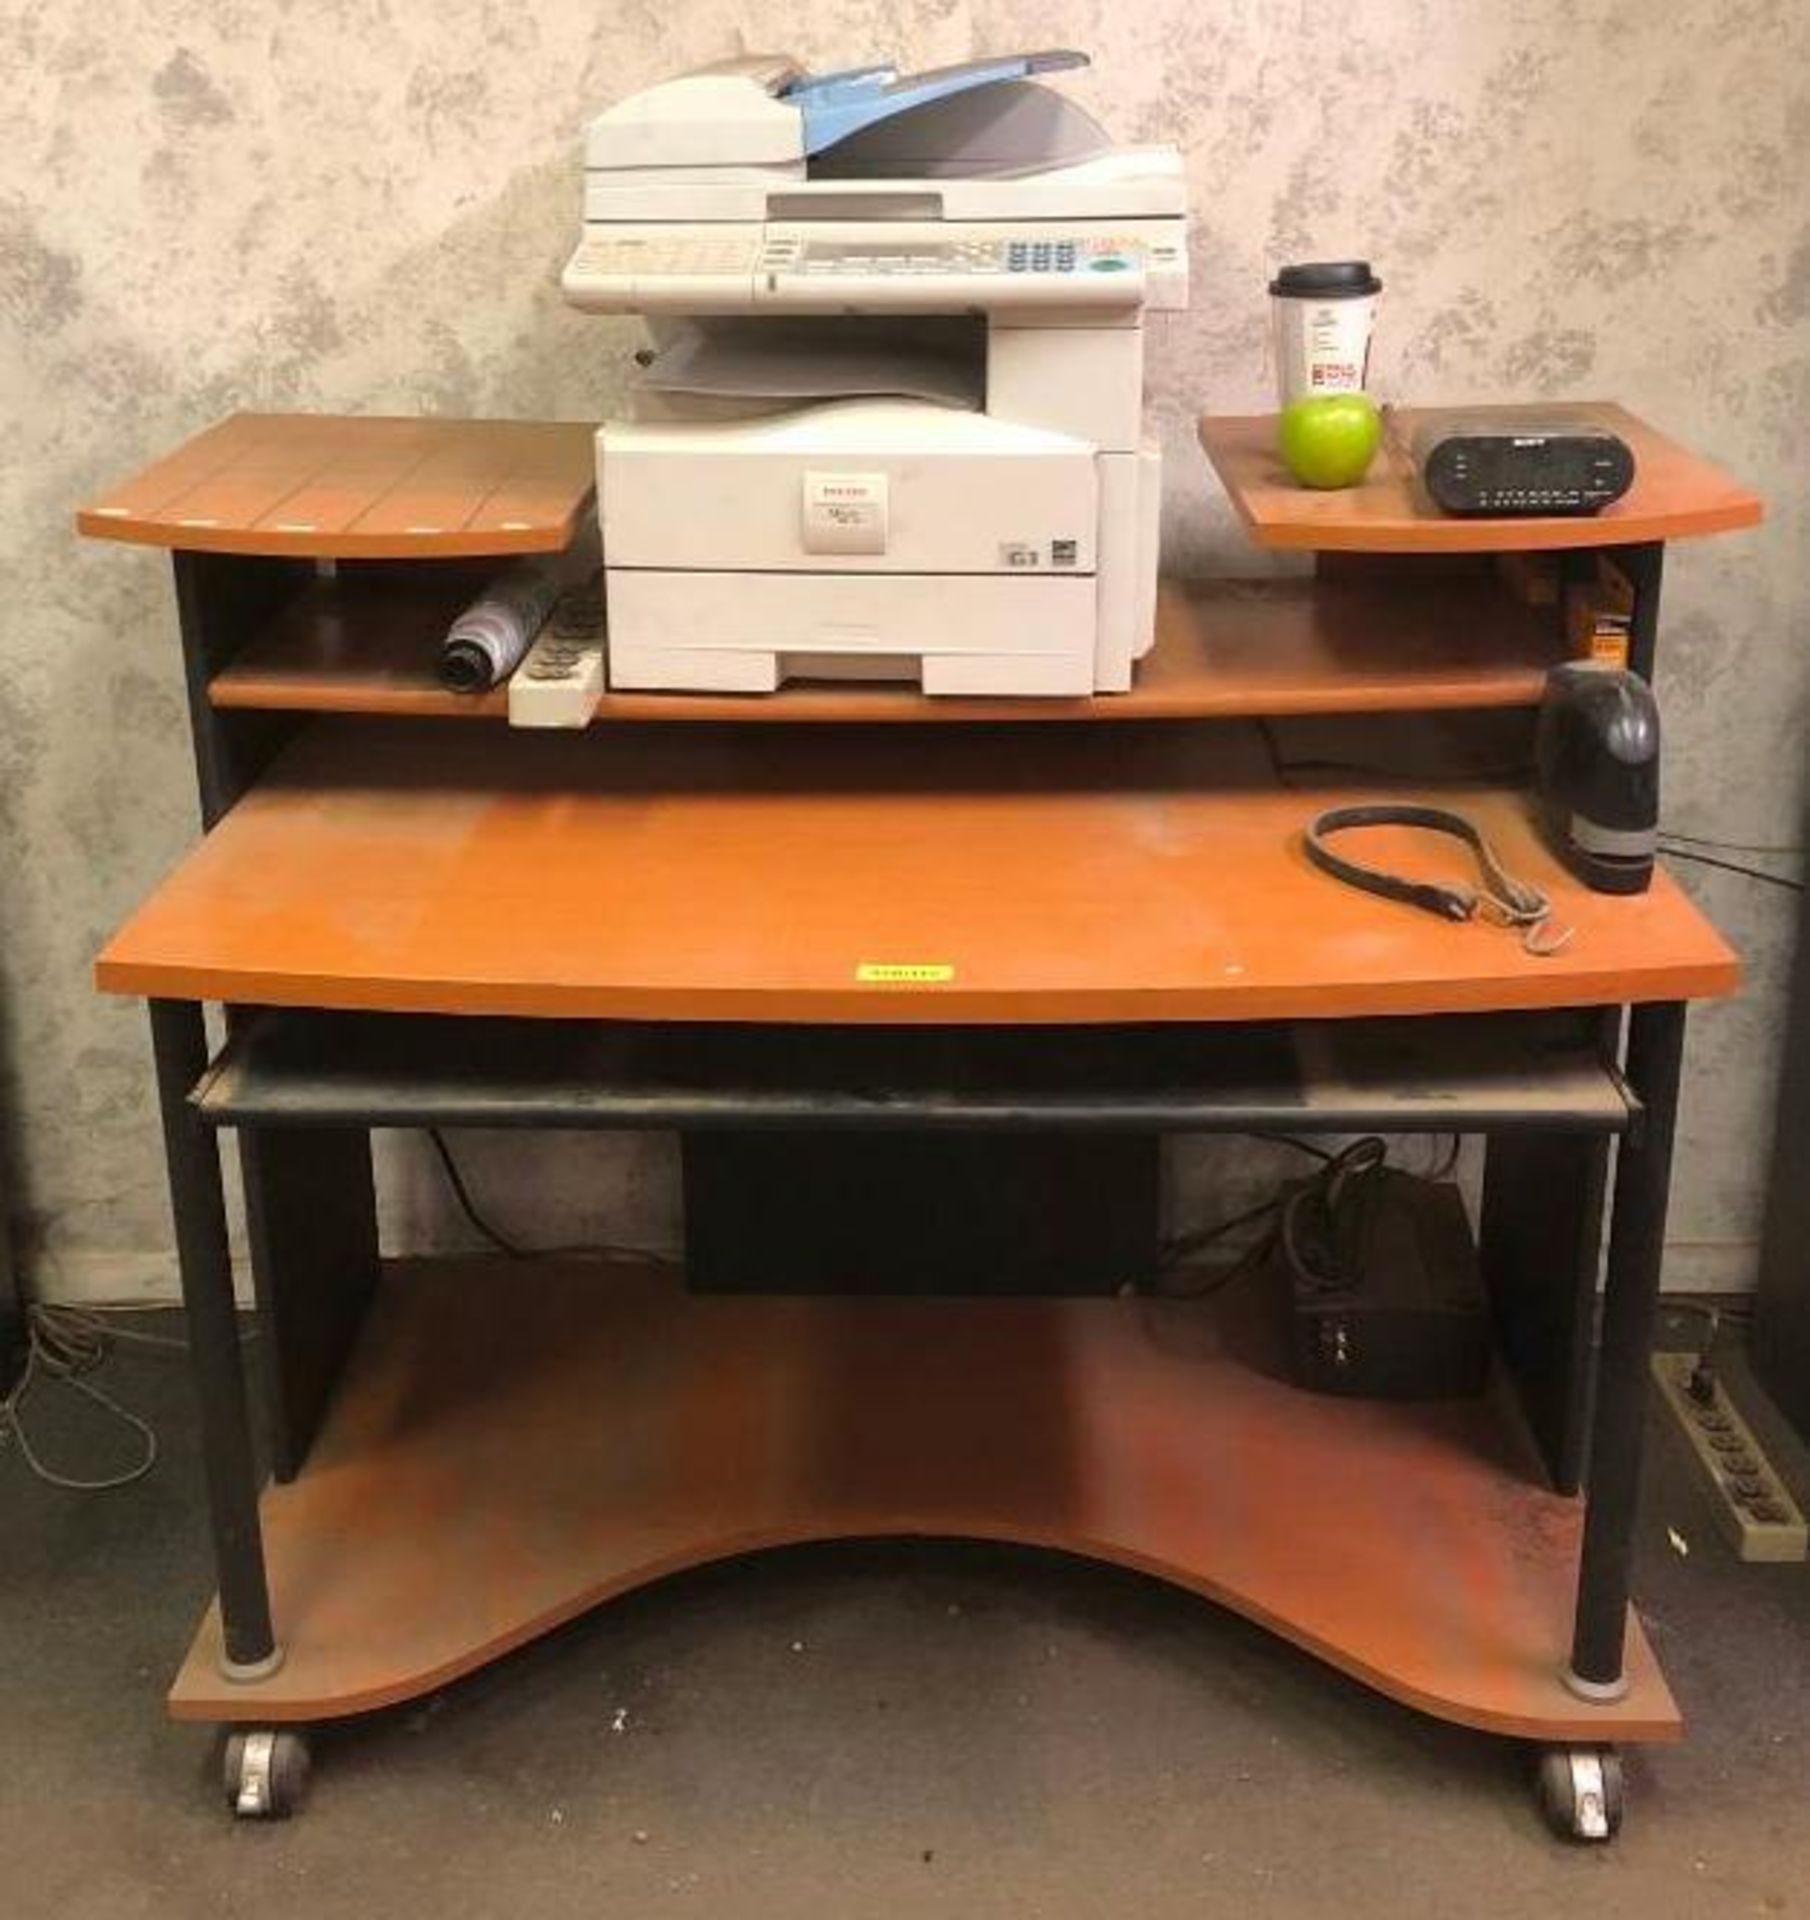 DESCRIPTION DESK, PRINTER, ALARM CLOCK, ELECTRIC STAPLER AND BATTERY BACKUP AS SHOWN THIS LOT IS ONE